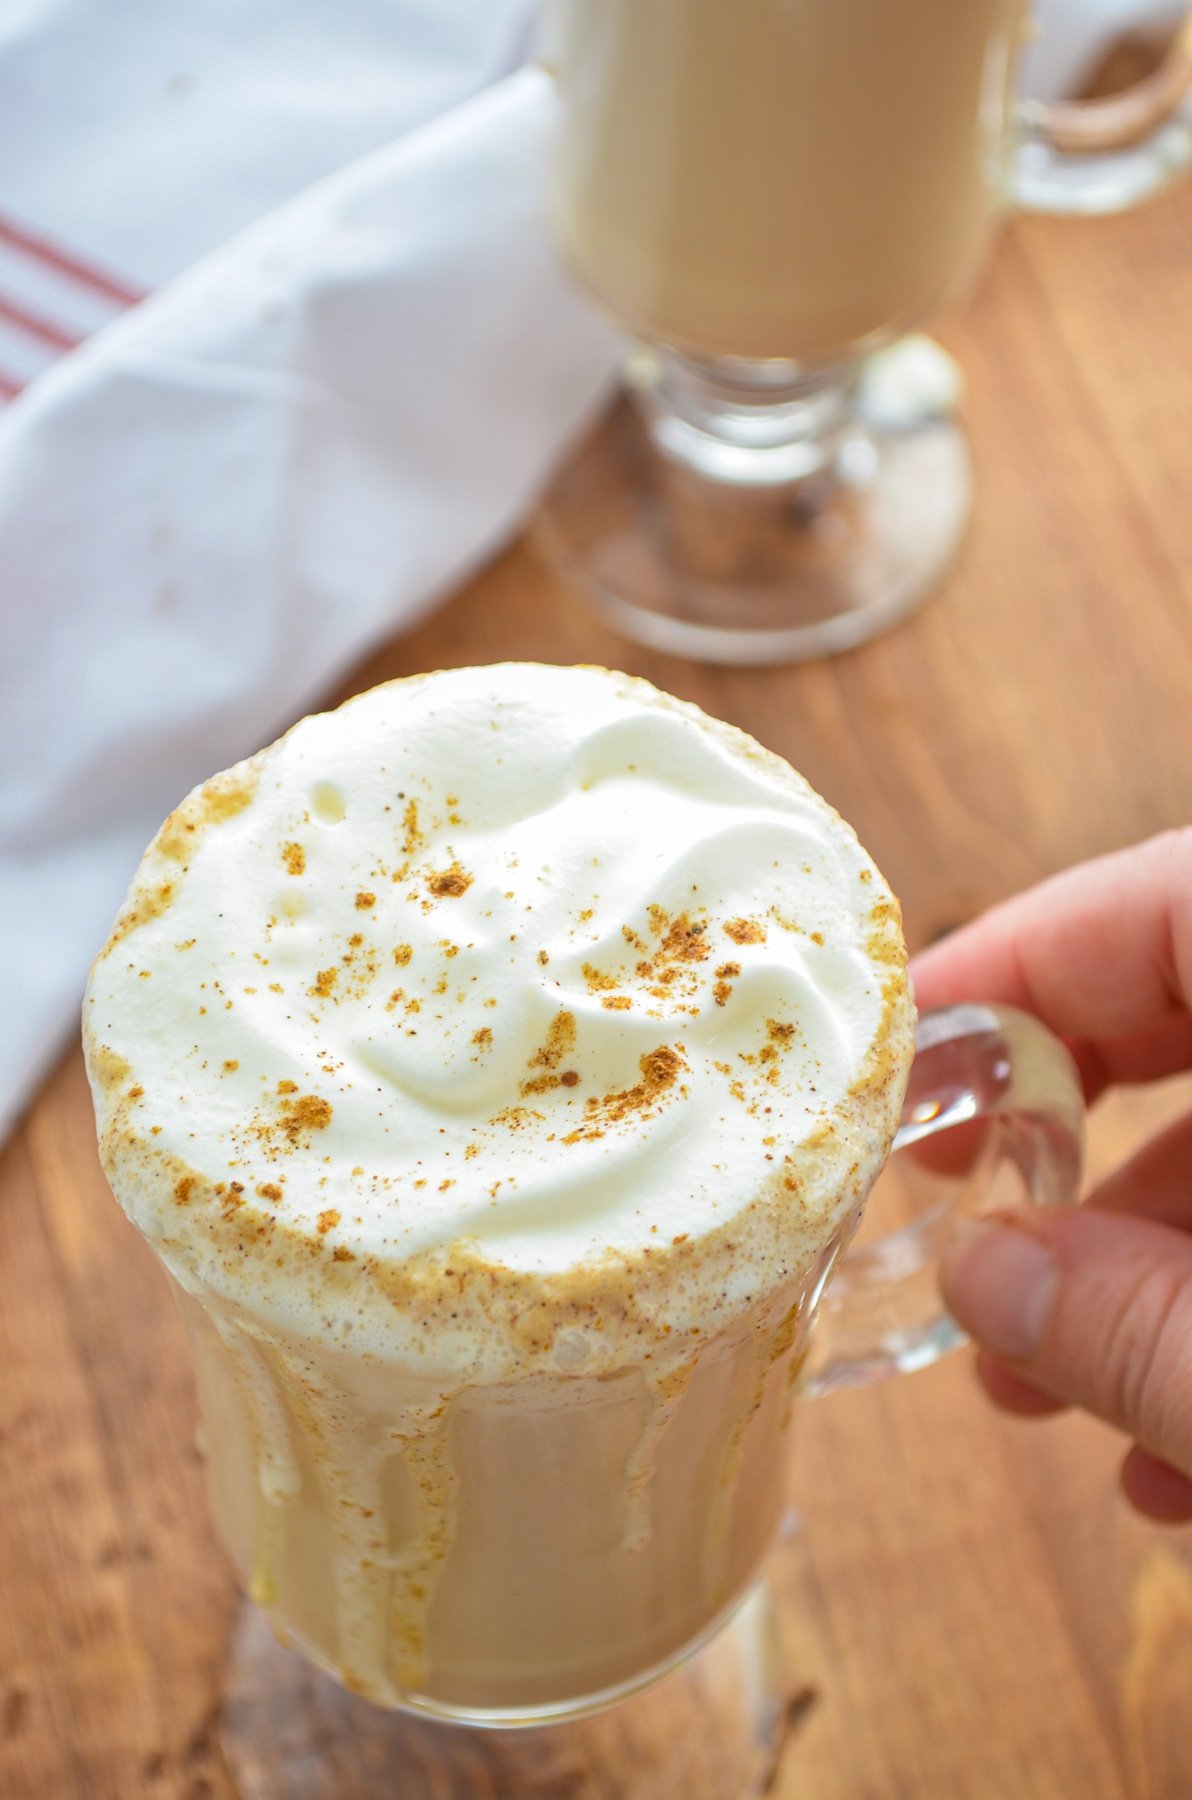 A glass mug filled with a flavored coffee and whipped cream is being lifted by a hand.